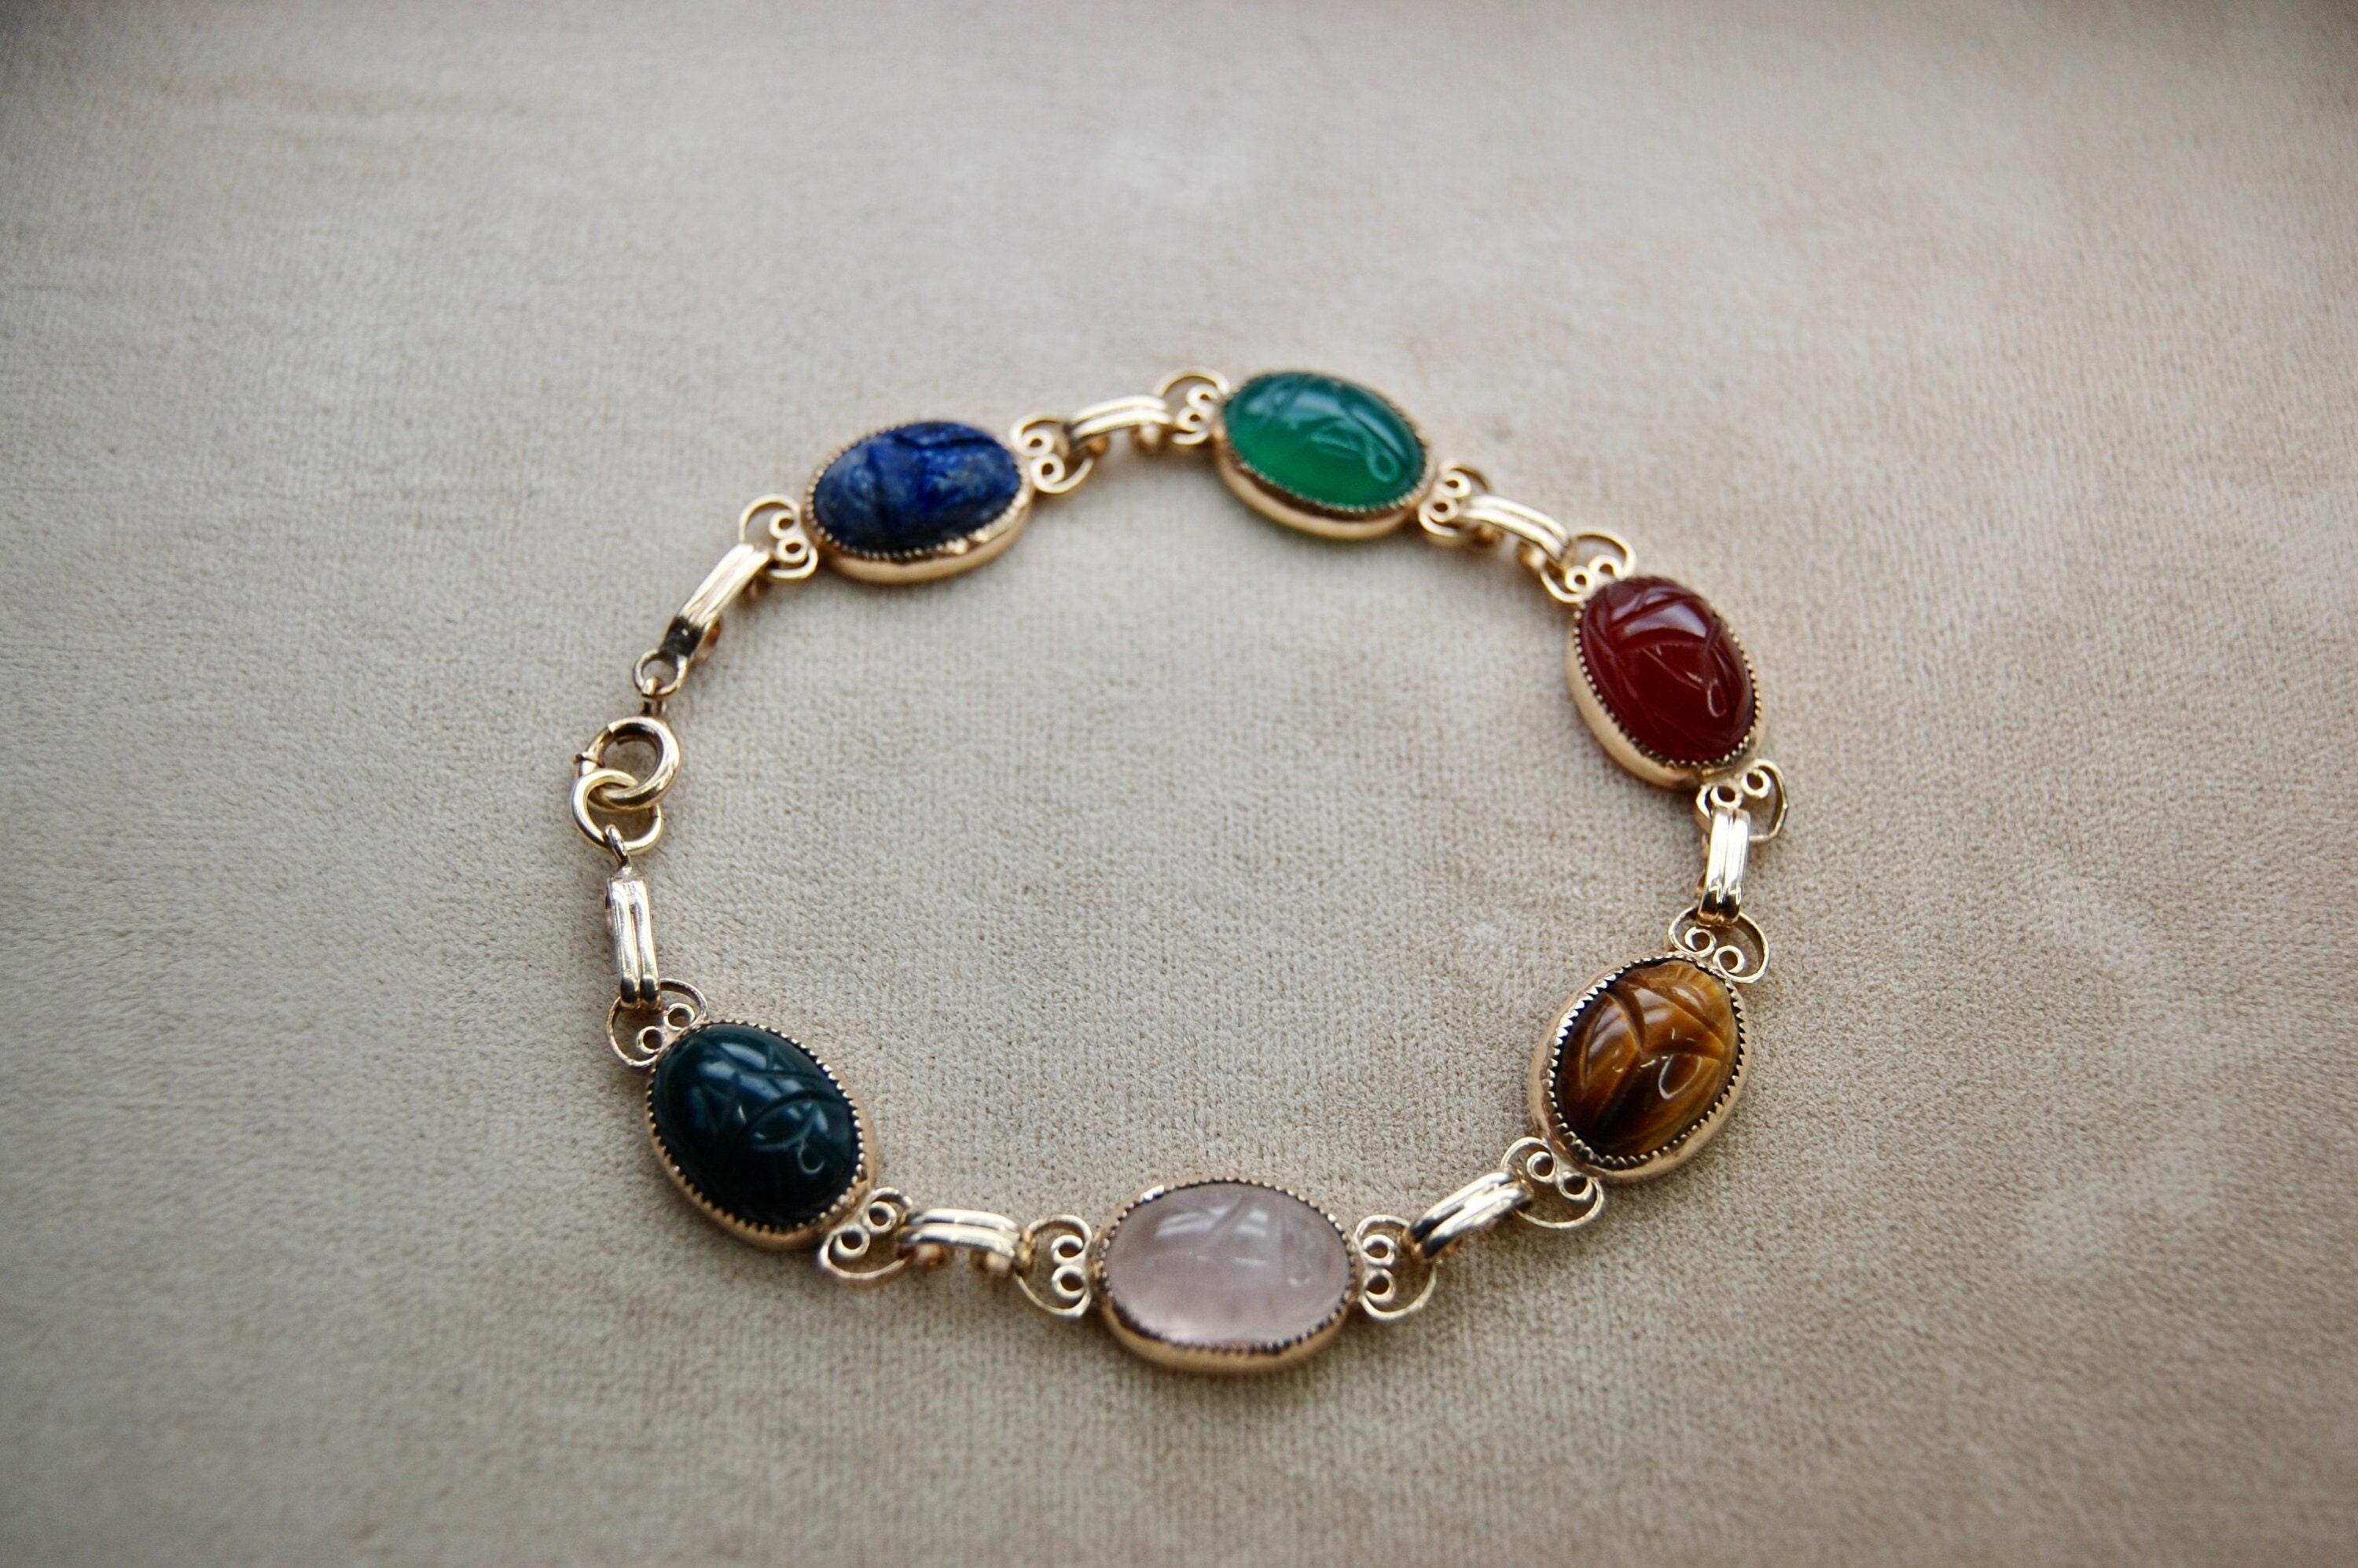 Vintage 14K Yellow Gold Scarab Bracelet 6.5 inches length Circa 1960 -  Colonial Trading Company